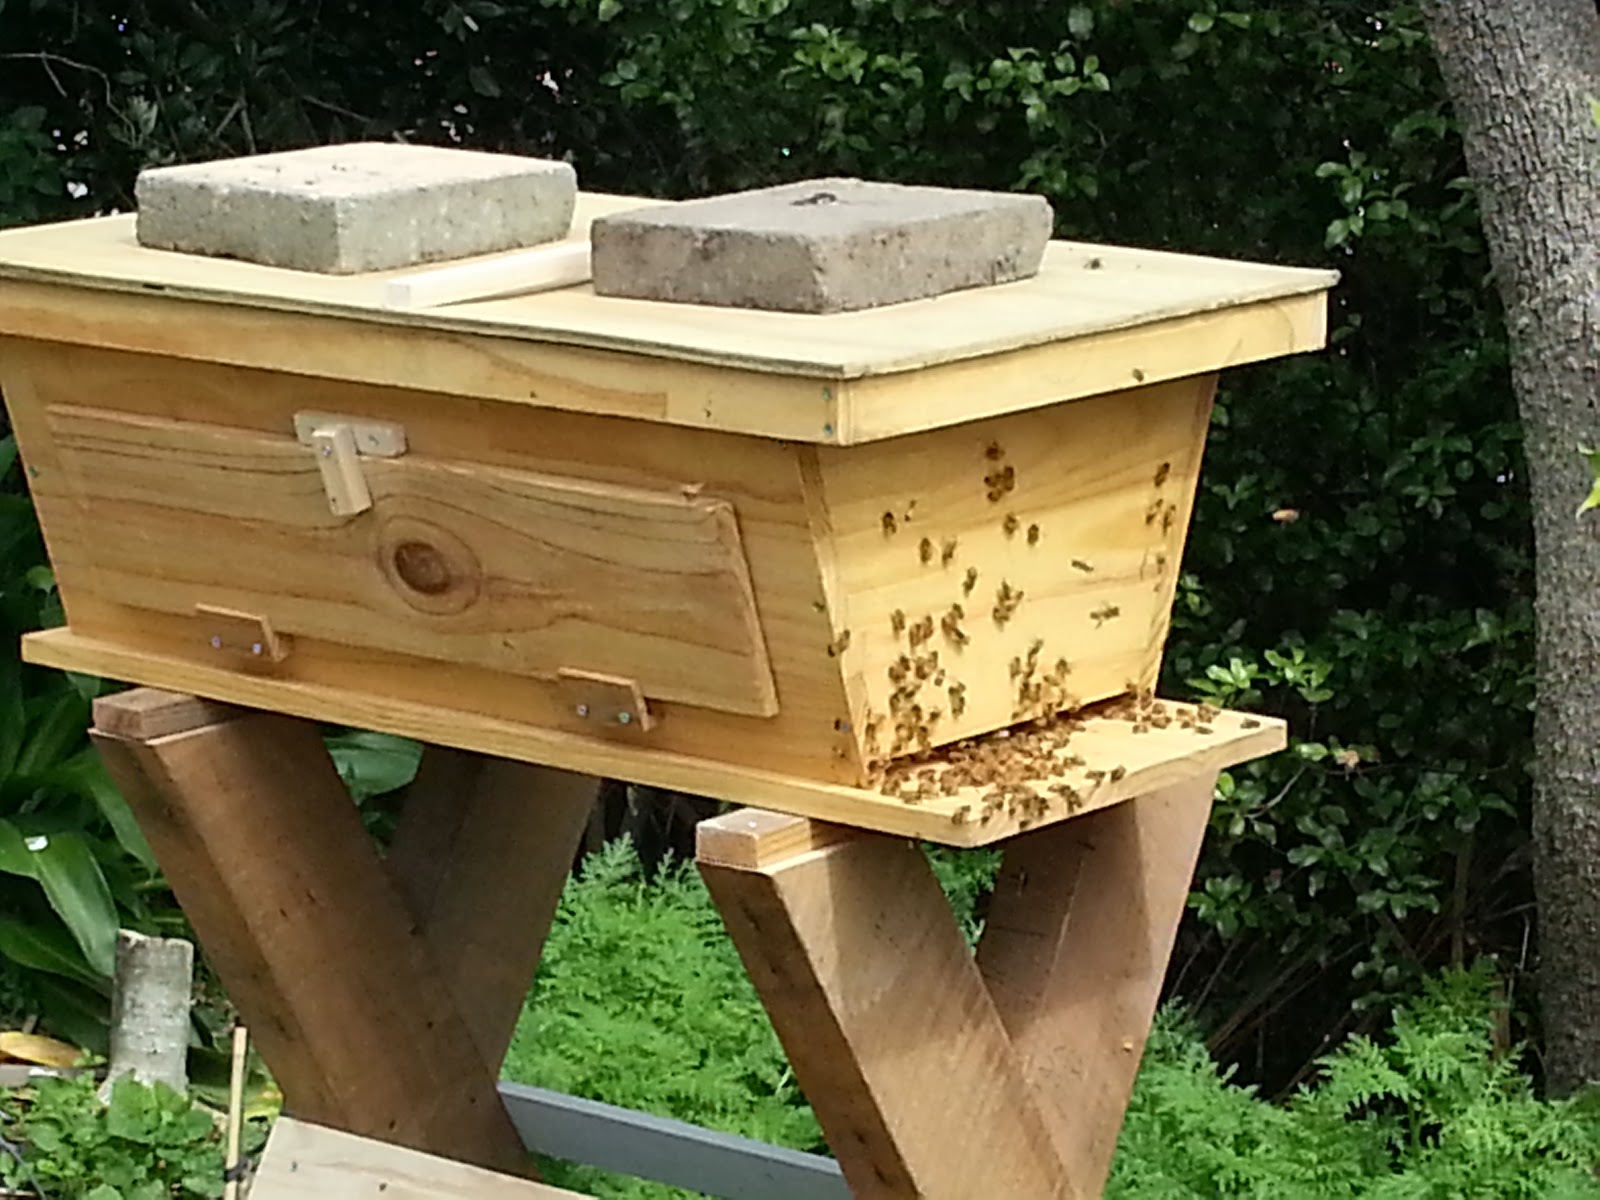 Golden mean top bar hive plans pdf ~ Easy project